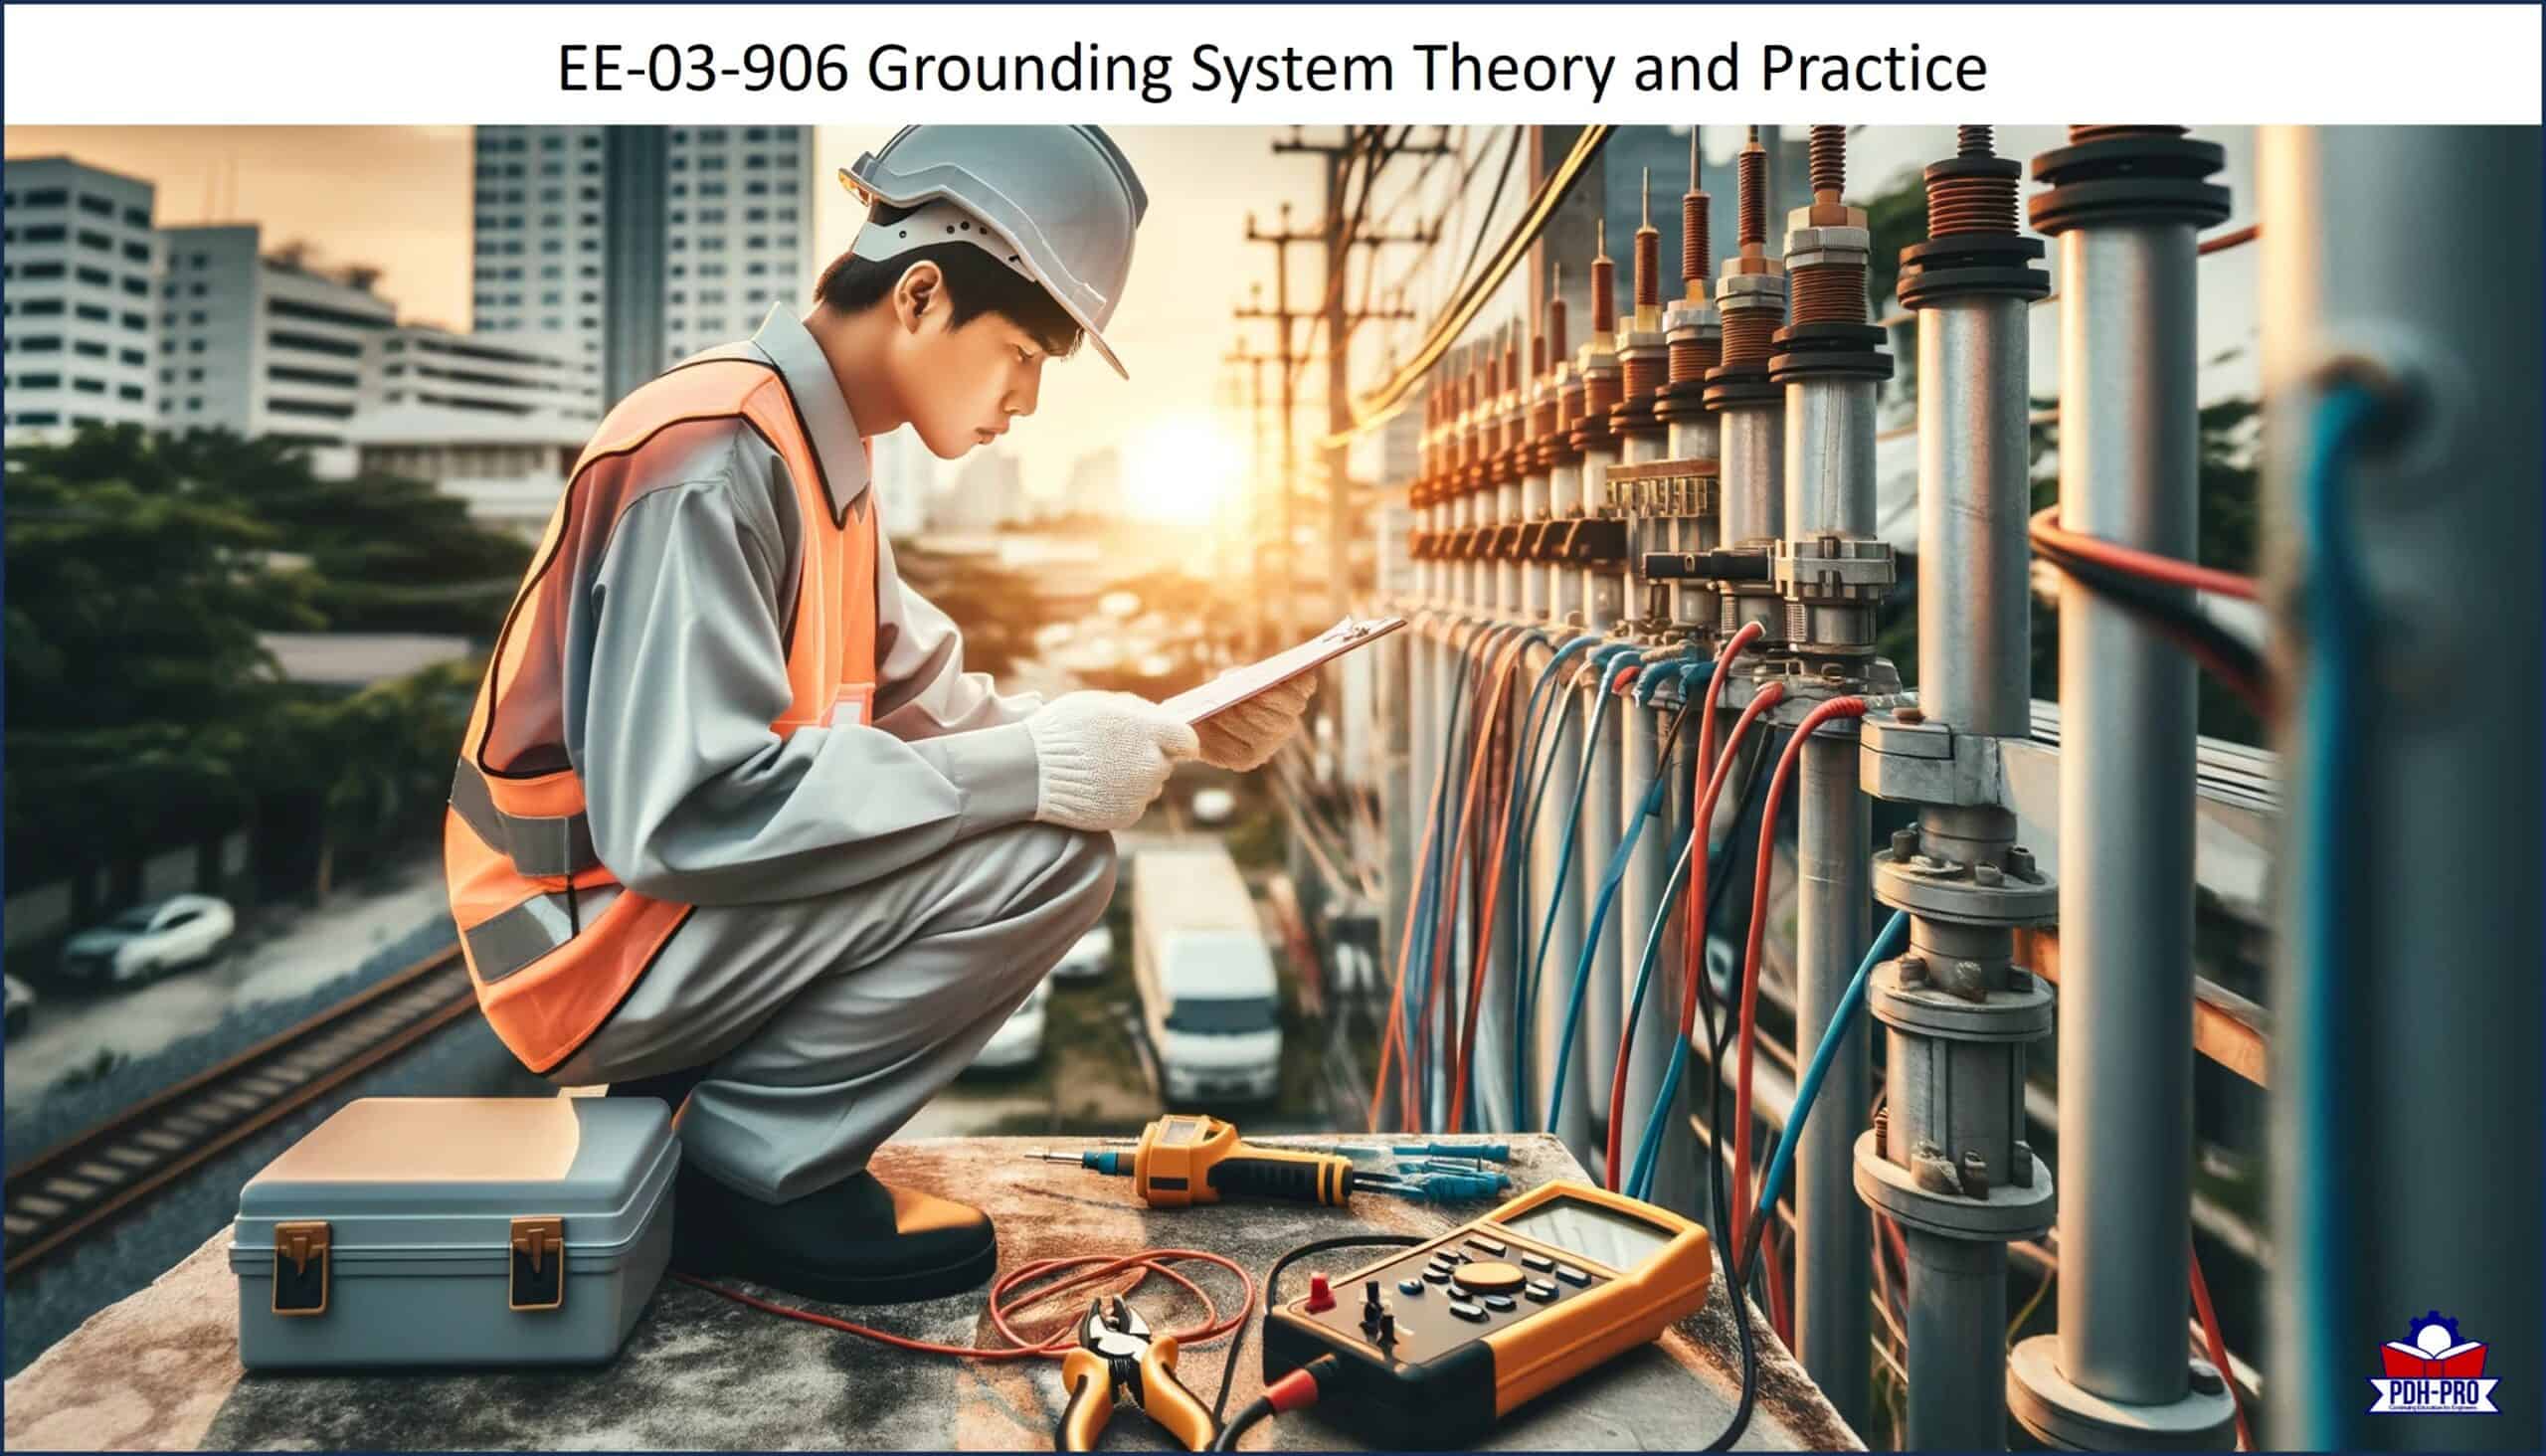 Grounding System Theory and Practice